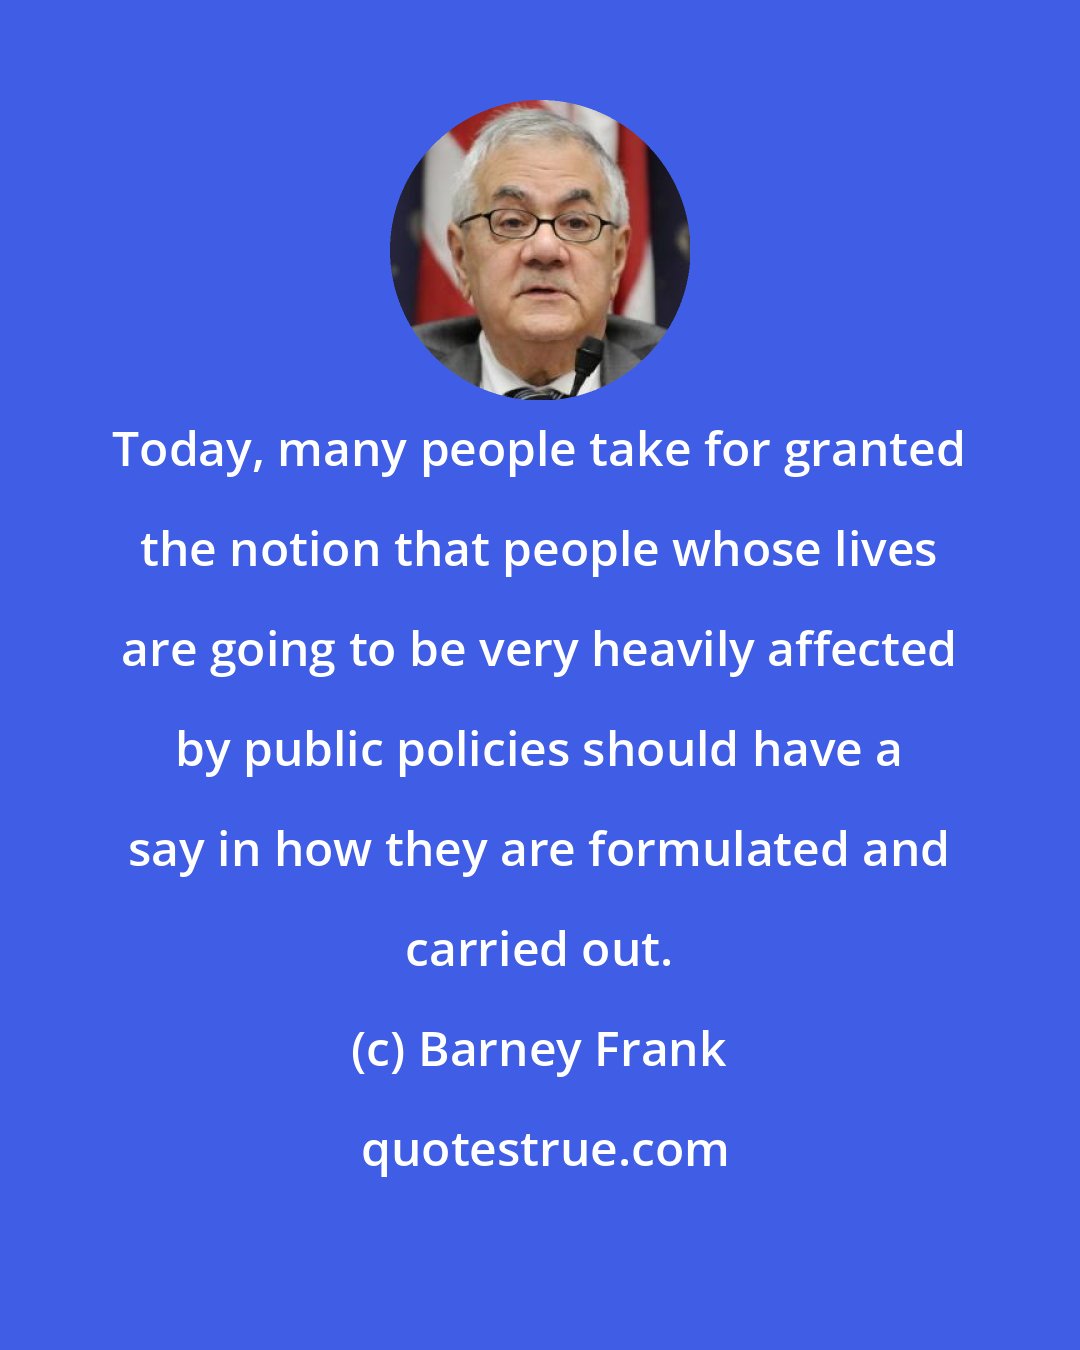 Barney Frank: Today, many people take for granted the notion that people whose lives are going to be very heavily affected by public policies should have a say in how they are formulated and carried out.